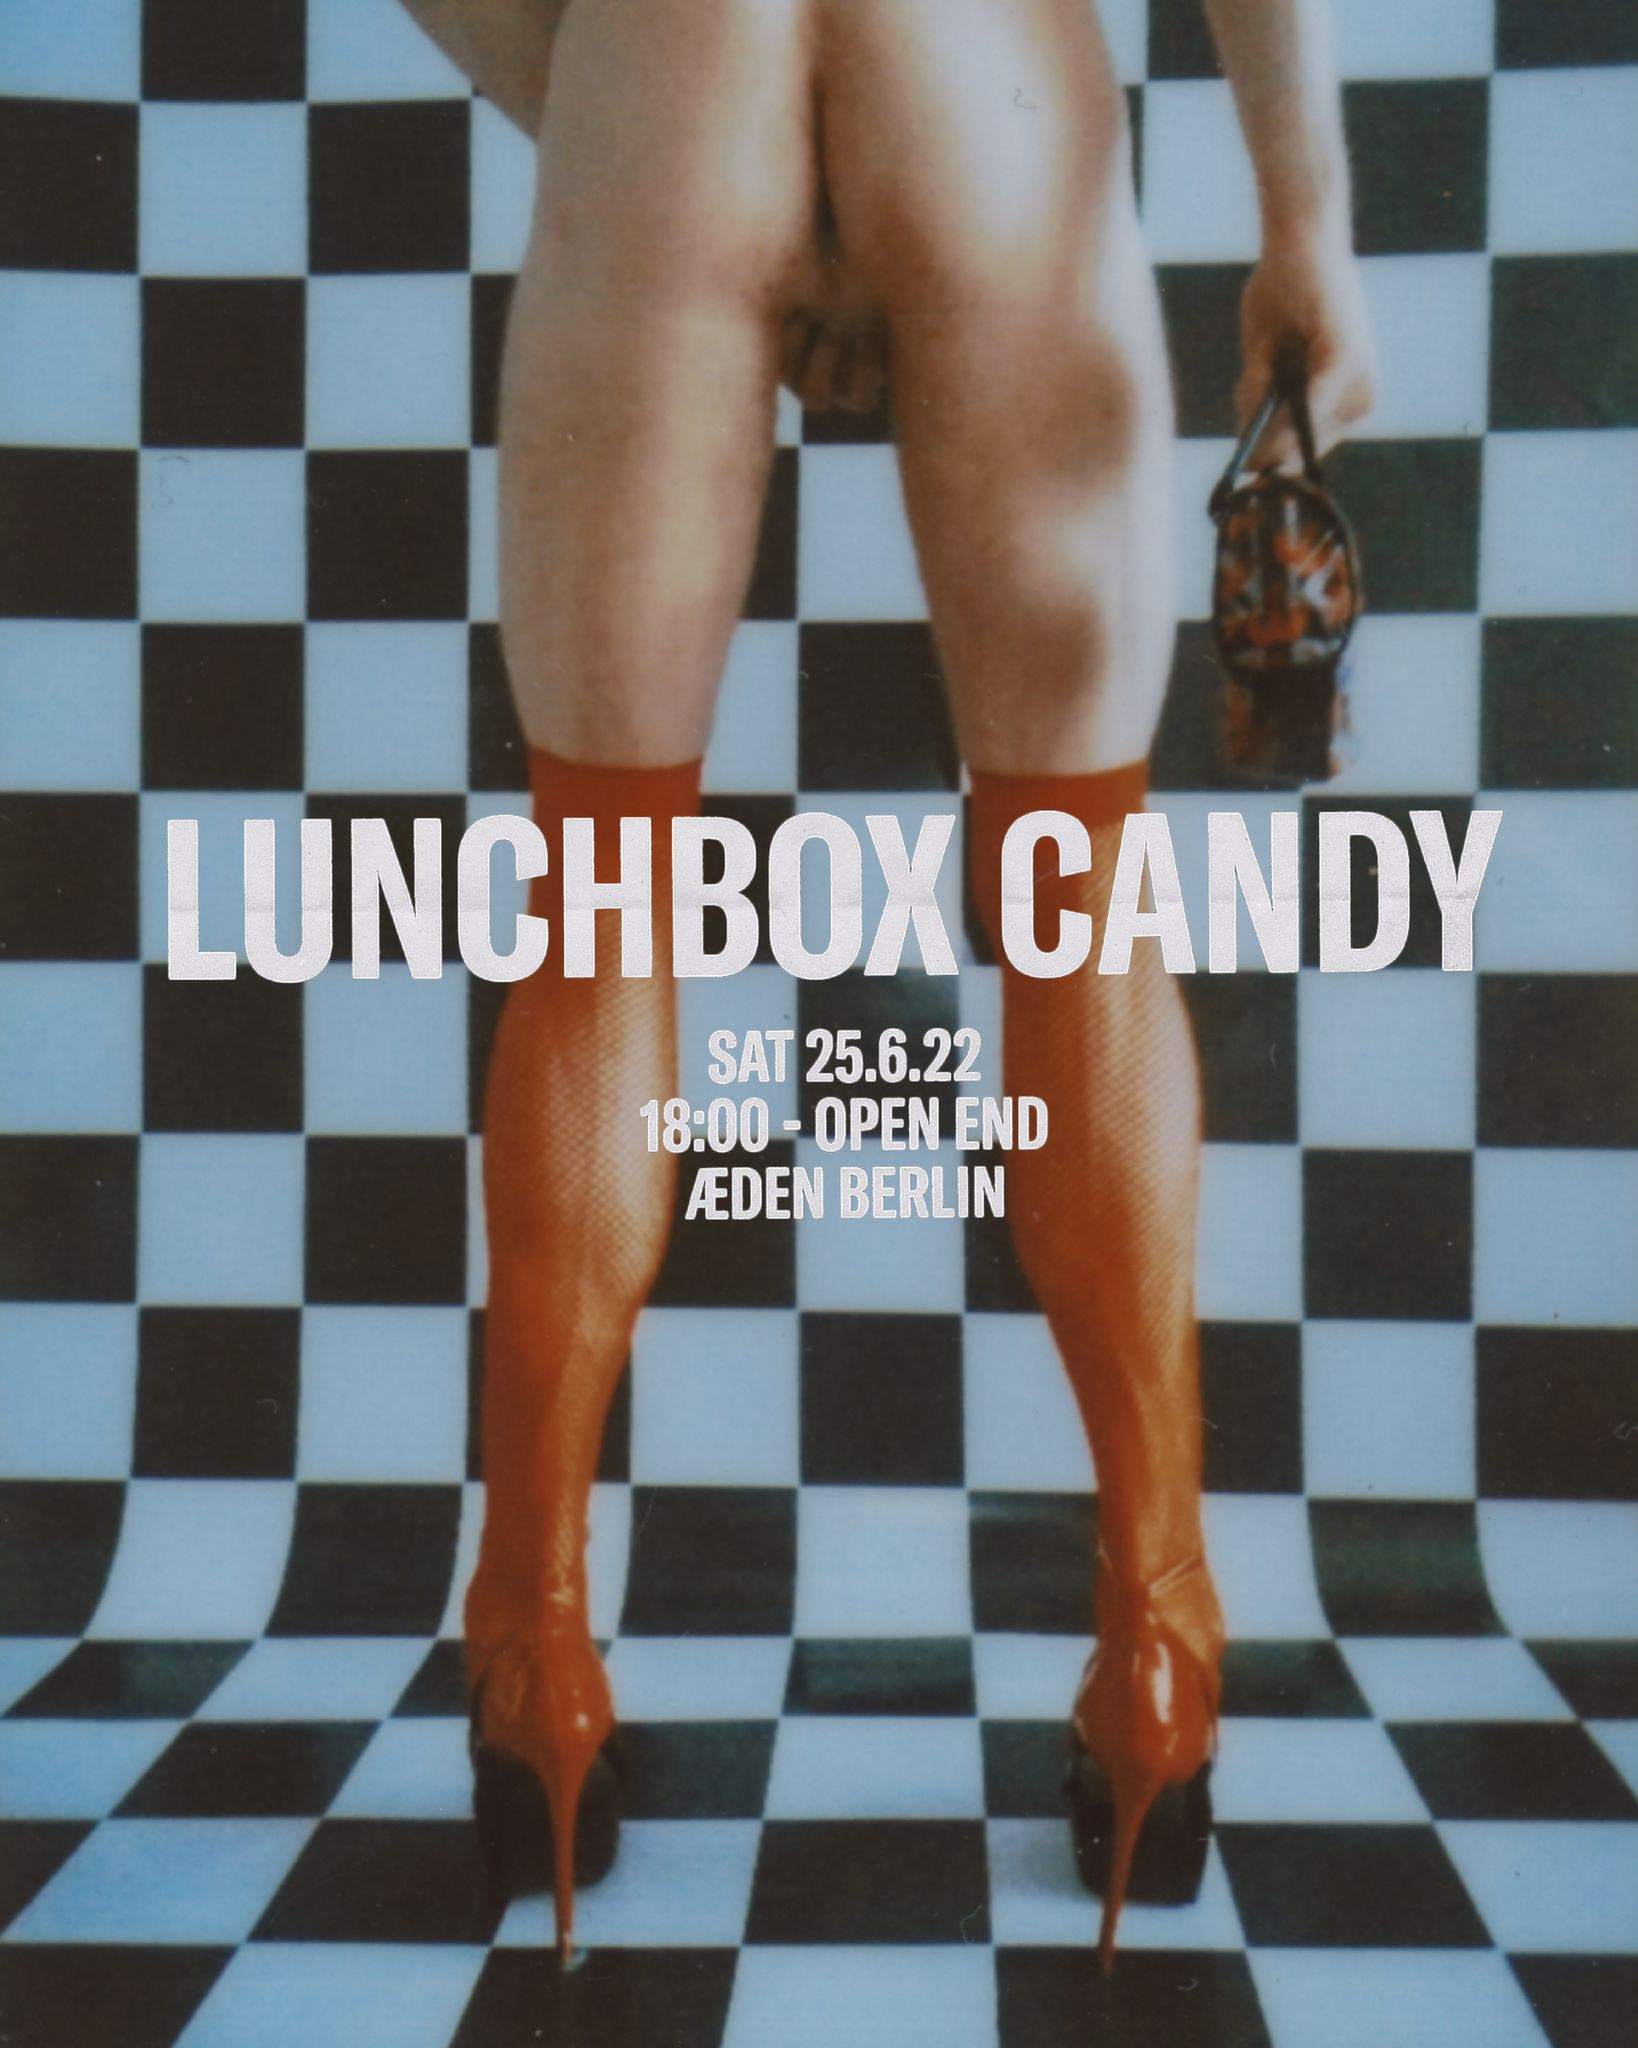 Lunchbox Candy - フライヤー表